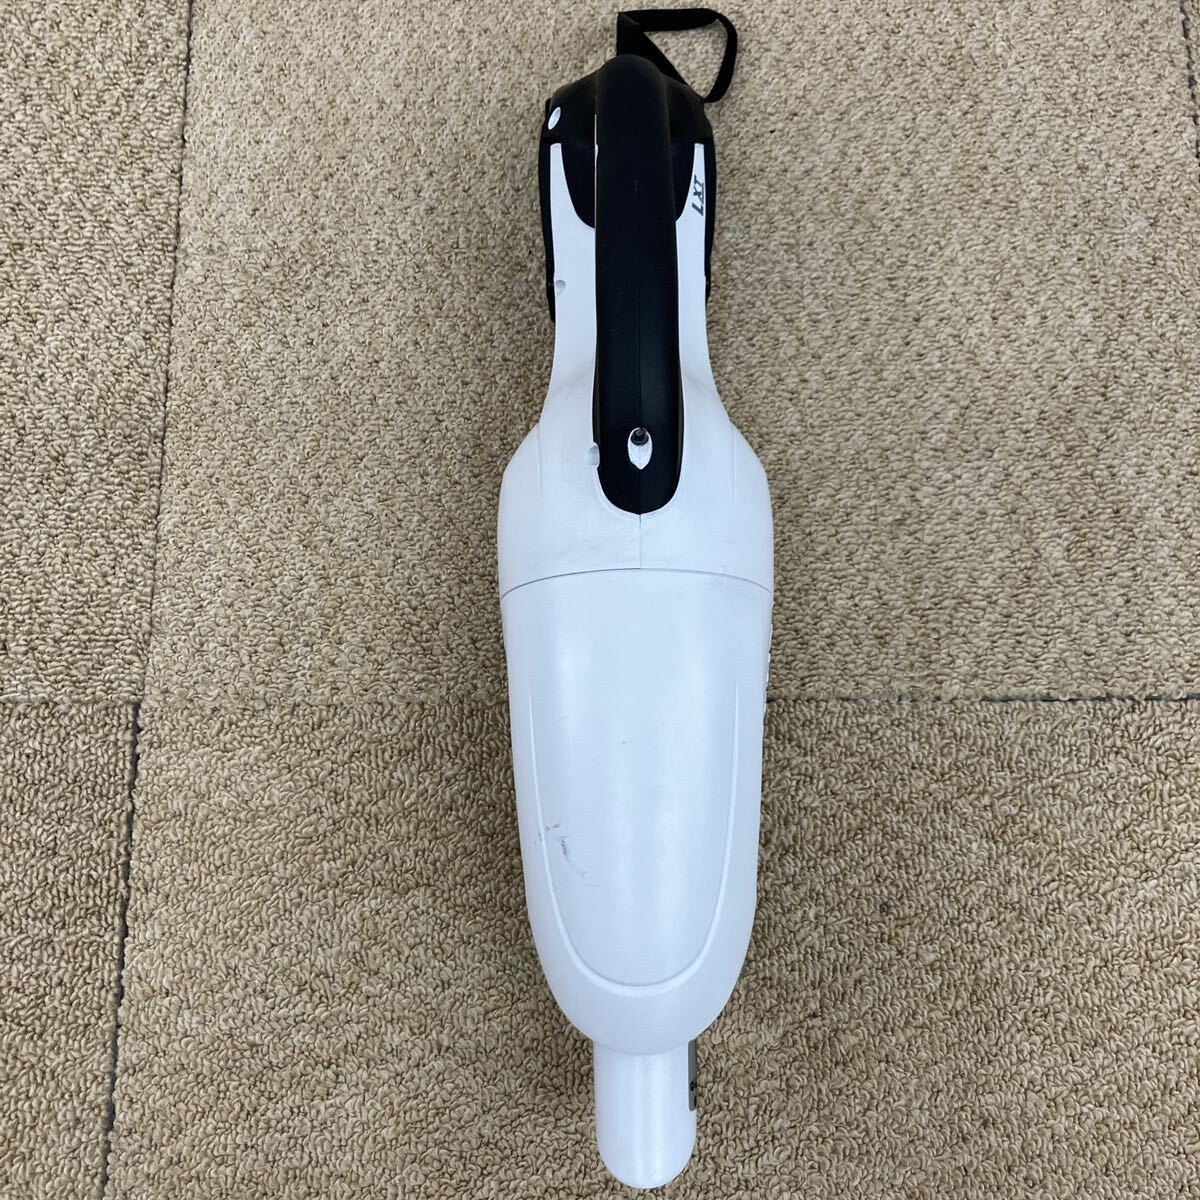 *[ selling out ]makita Makita rechargeable cleaner CL180FD cordless stick cleaner DC18RC with charger . operation verification ending vacuum cleaner 